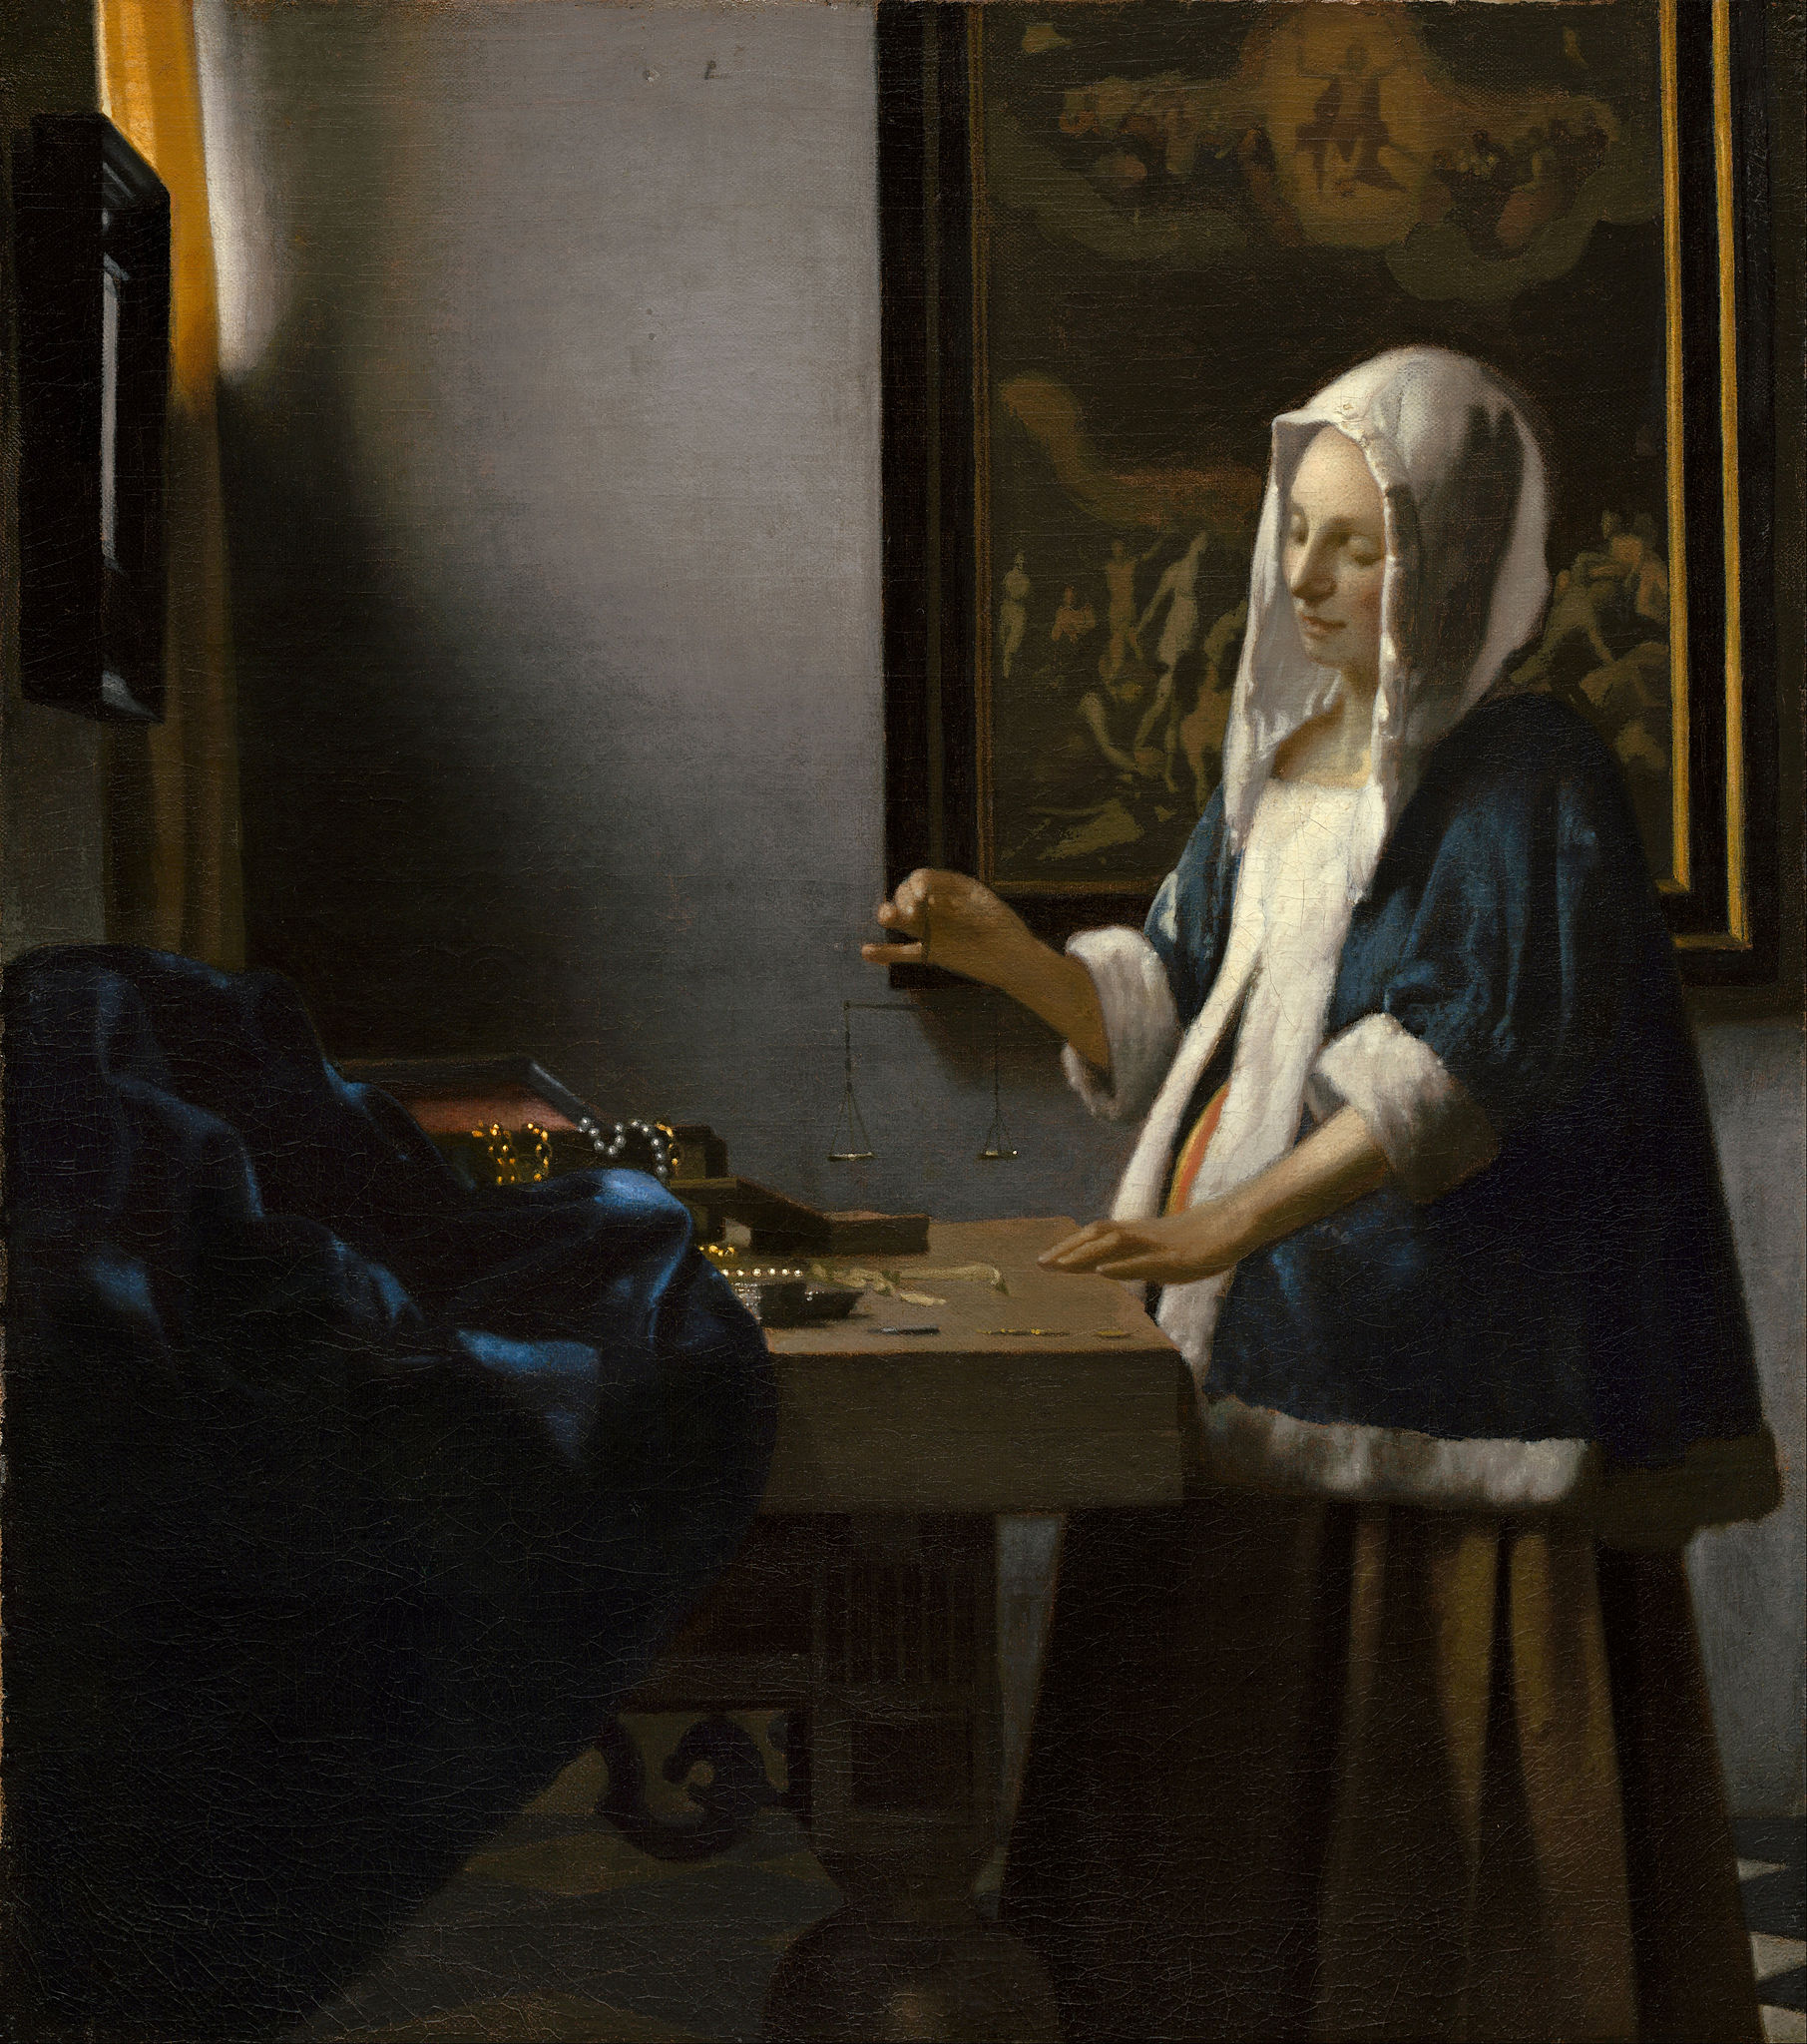 A painting of a woman holding a balance